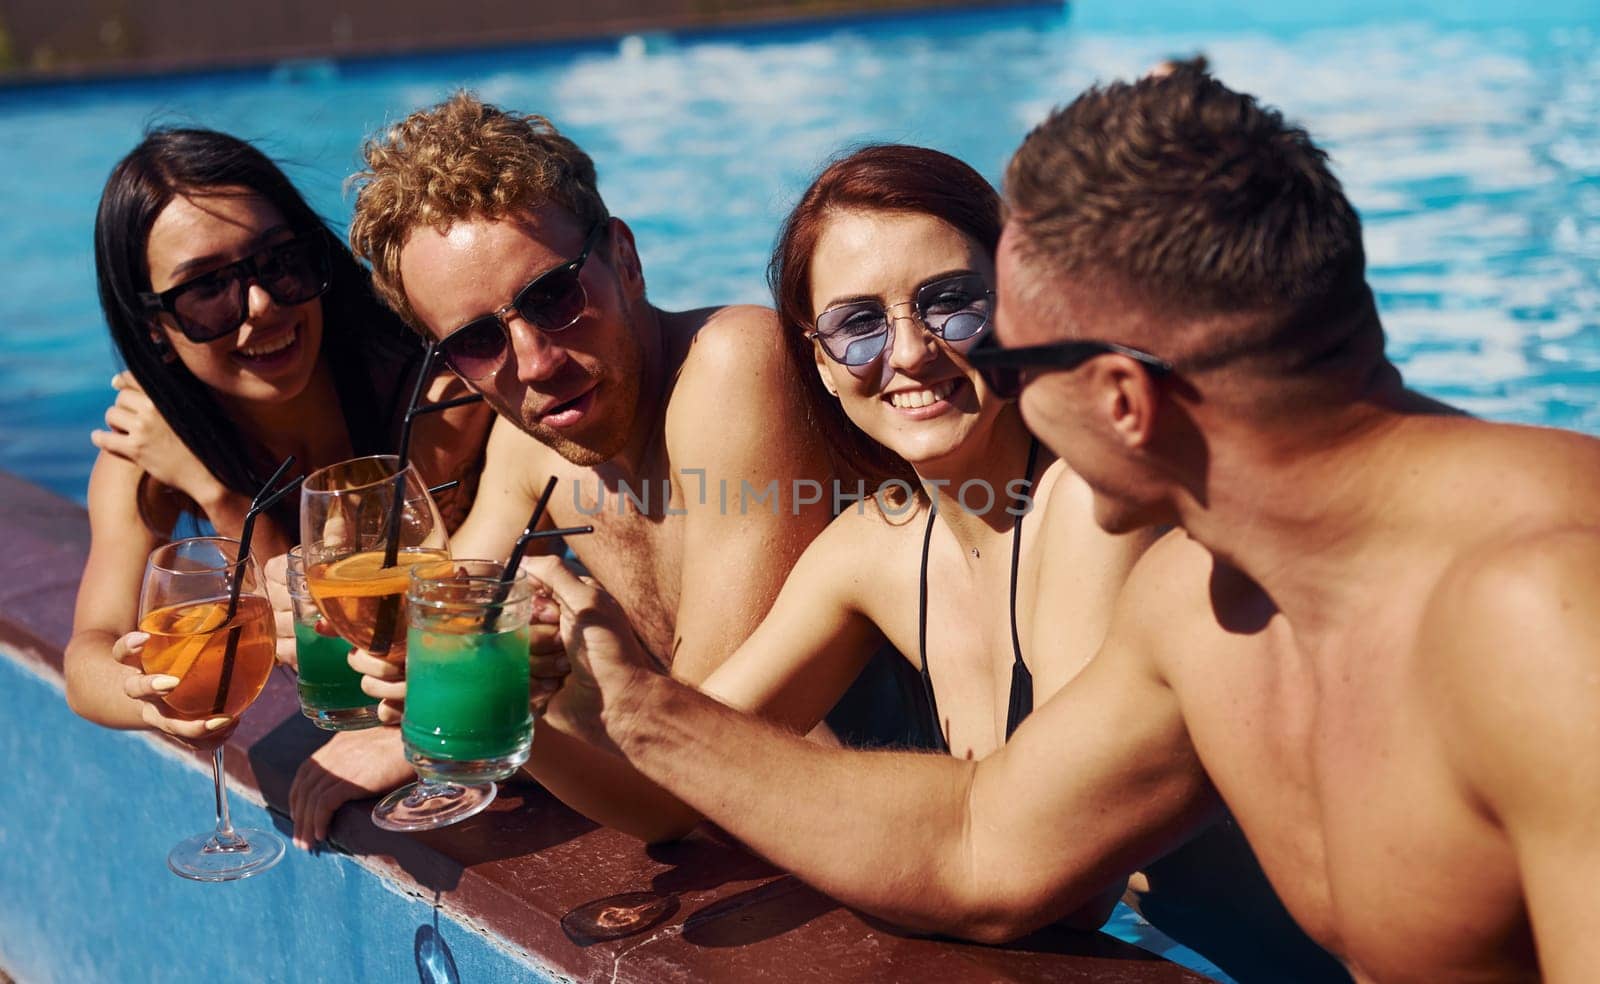 Talking and drinking. Group of young happy people have fun in swimming pool at daytime.